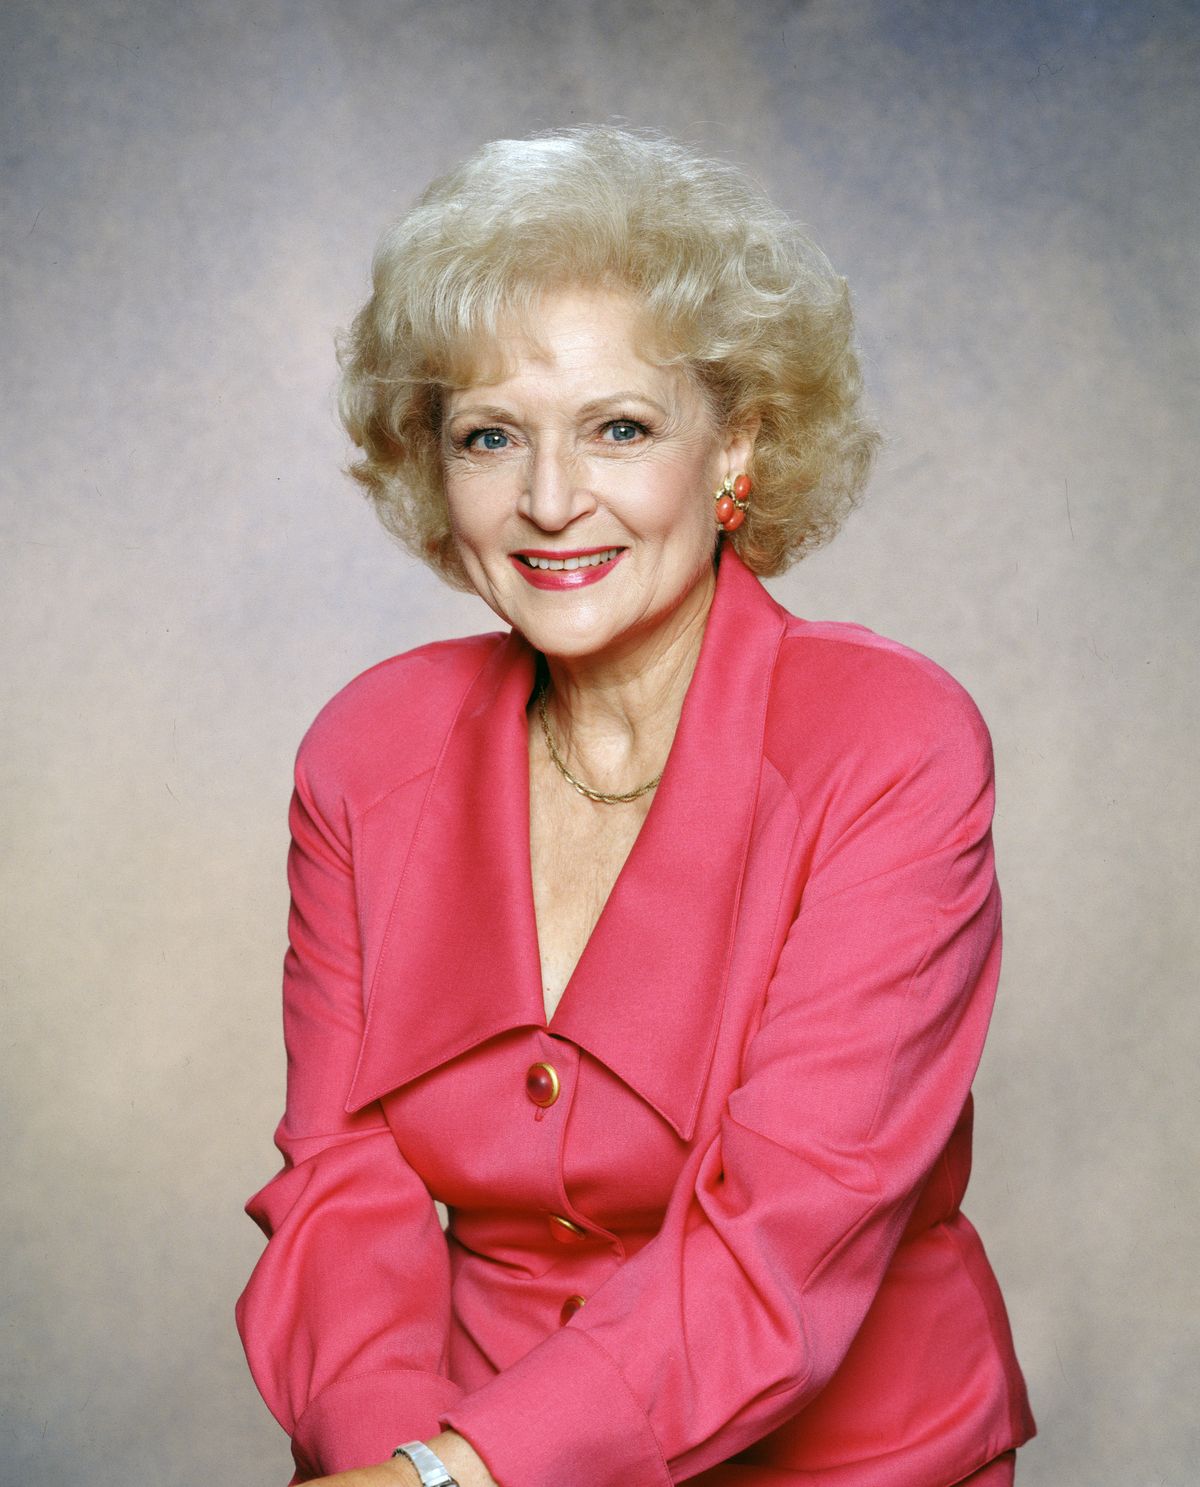 Betty White poses for a photo as Rose Nylund in "The Golden Palace" on January 1992. | Photo: Getty Images